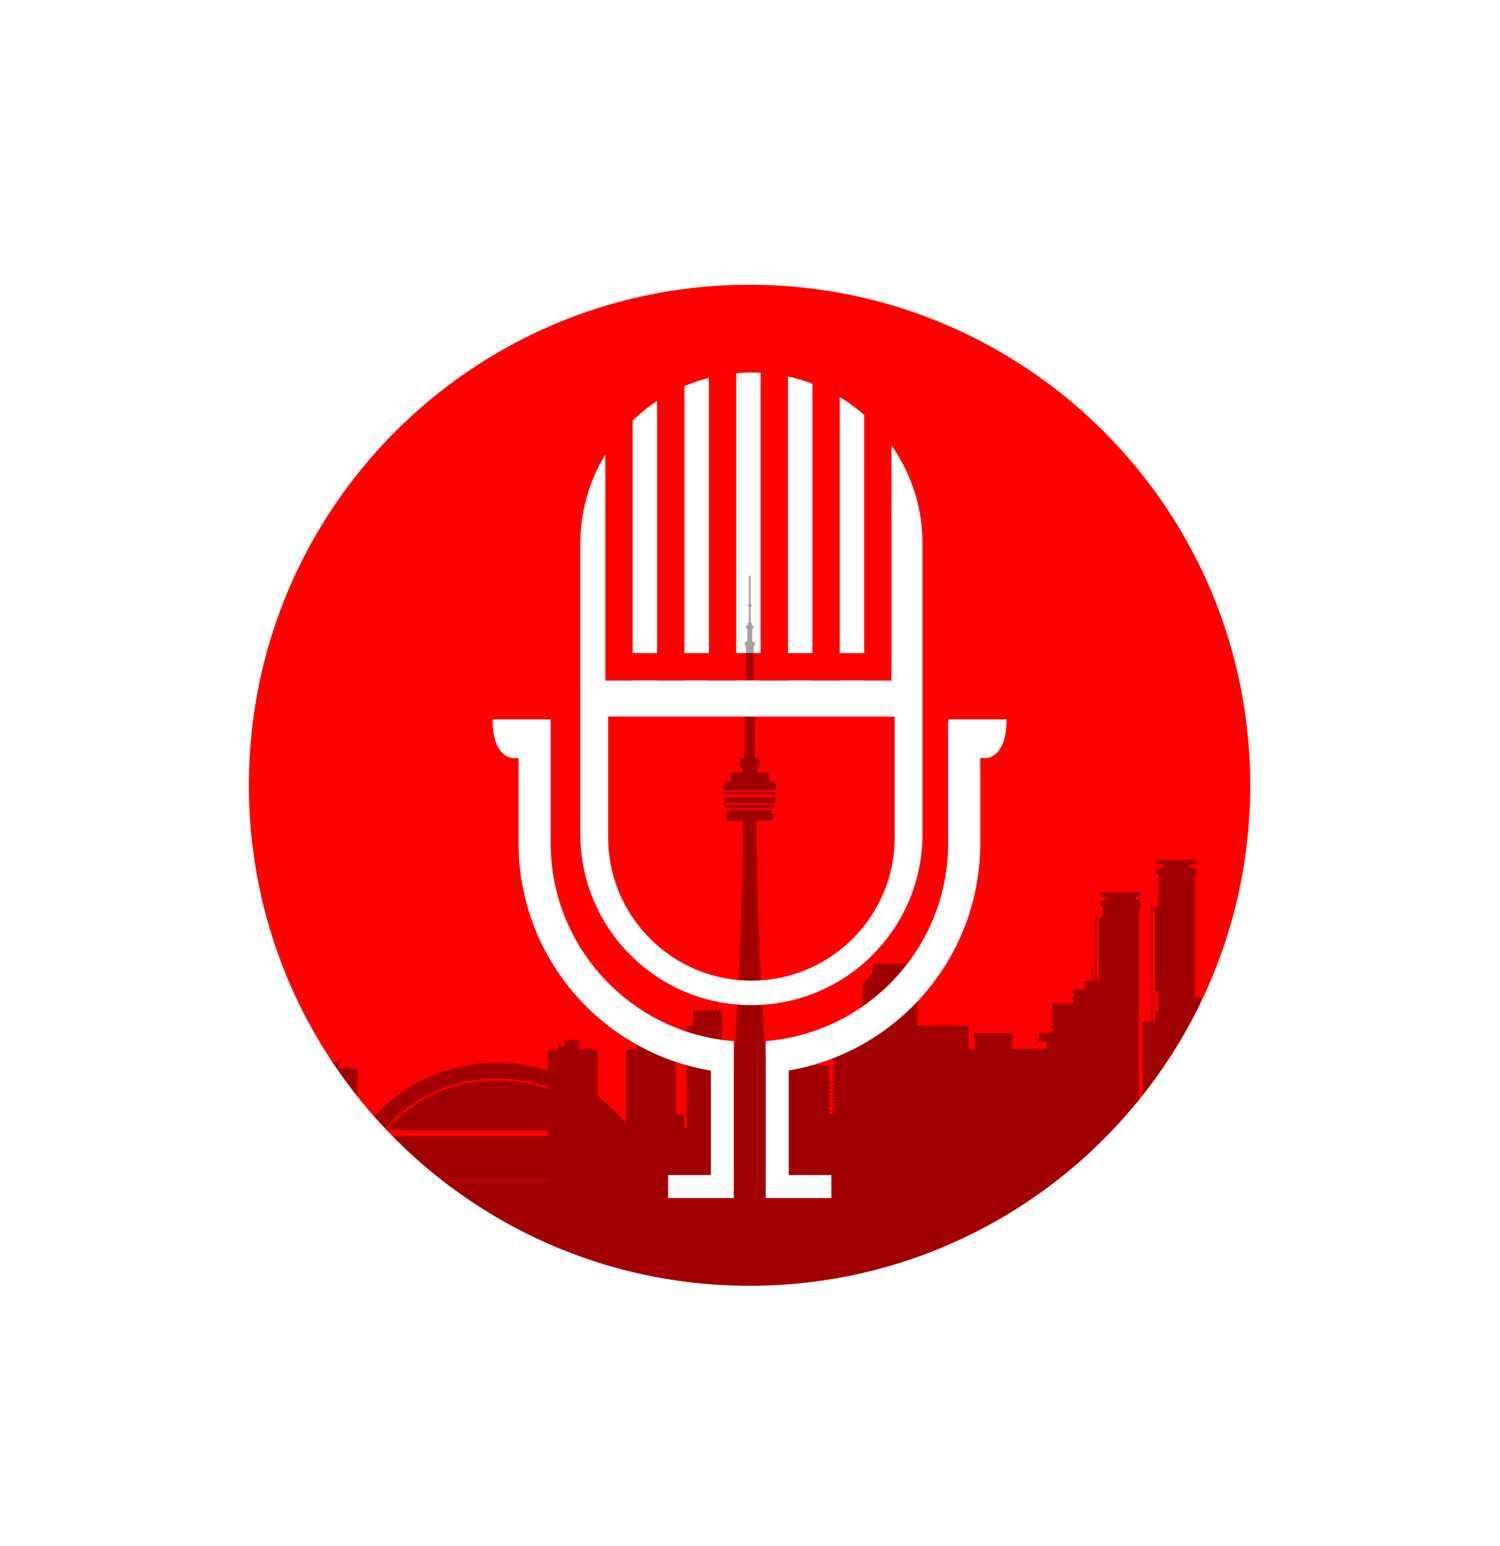 Real Talk Roundtable